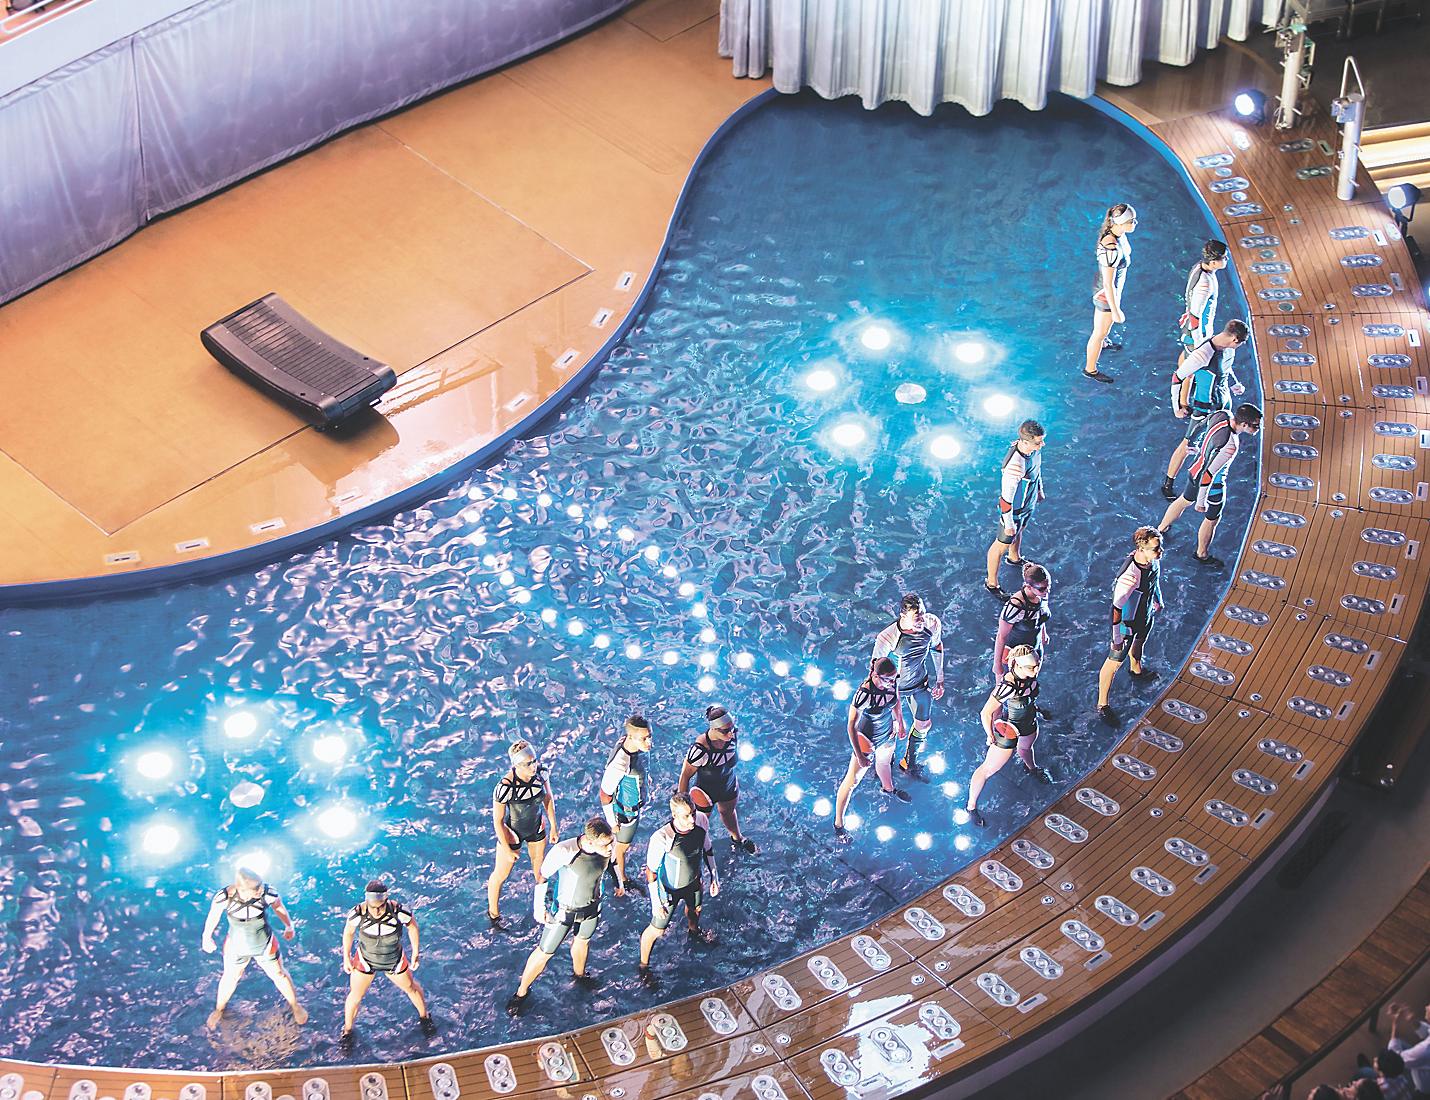 AquaTheater Shows on the RCL Wonder of the Seas